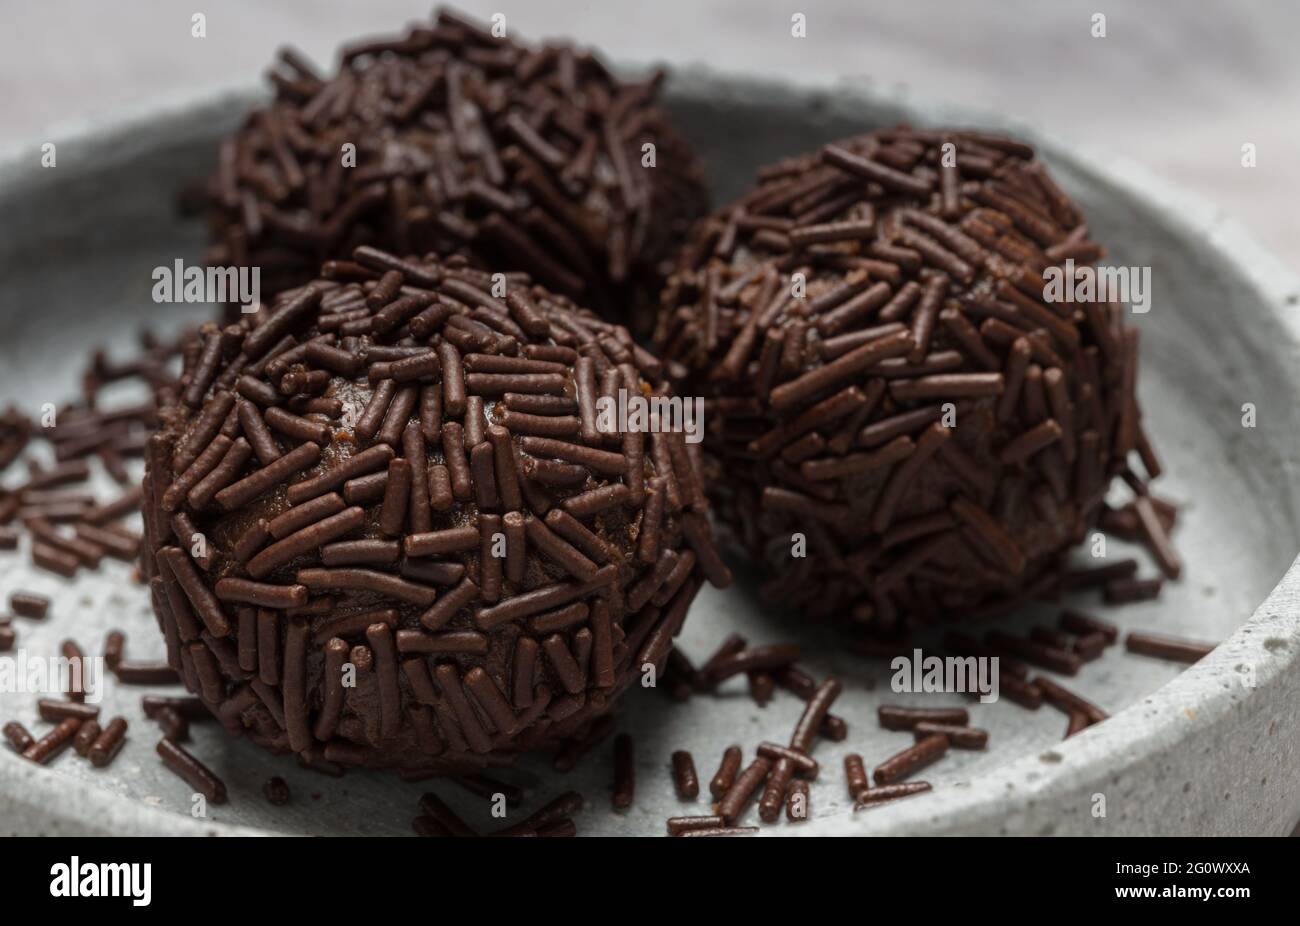 Rum balls with chocolate sprinkles in a bowl. Stock Photo